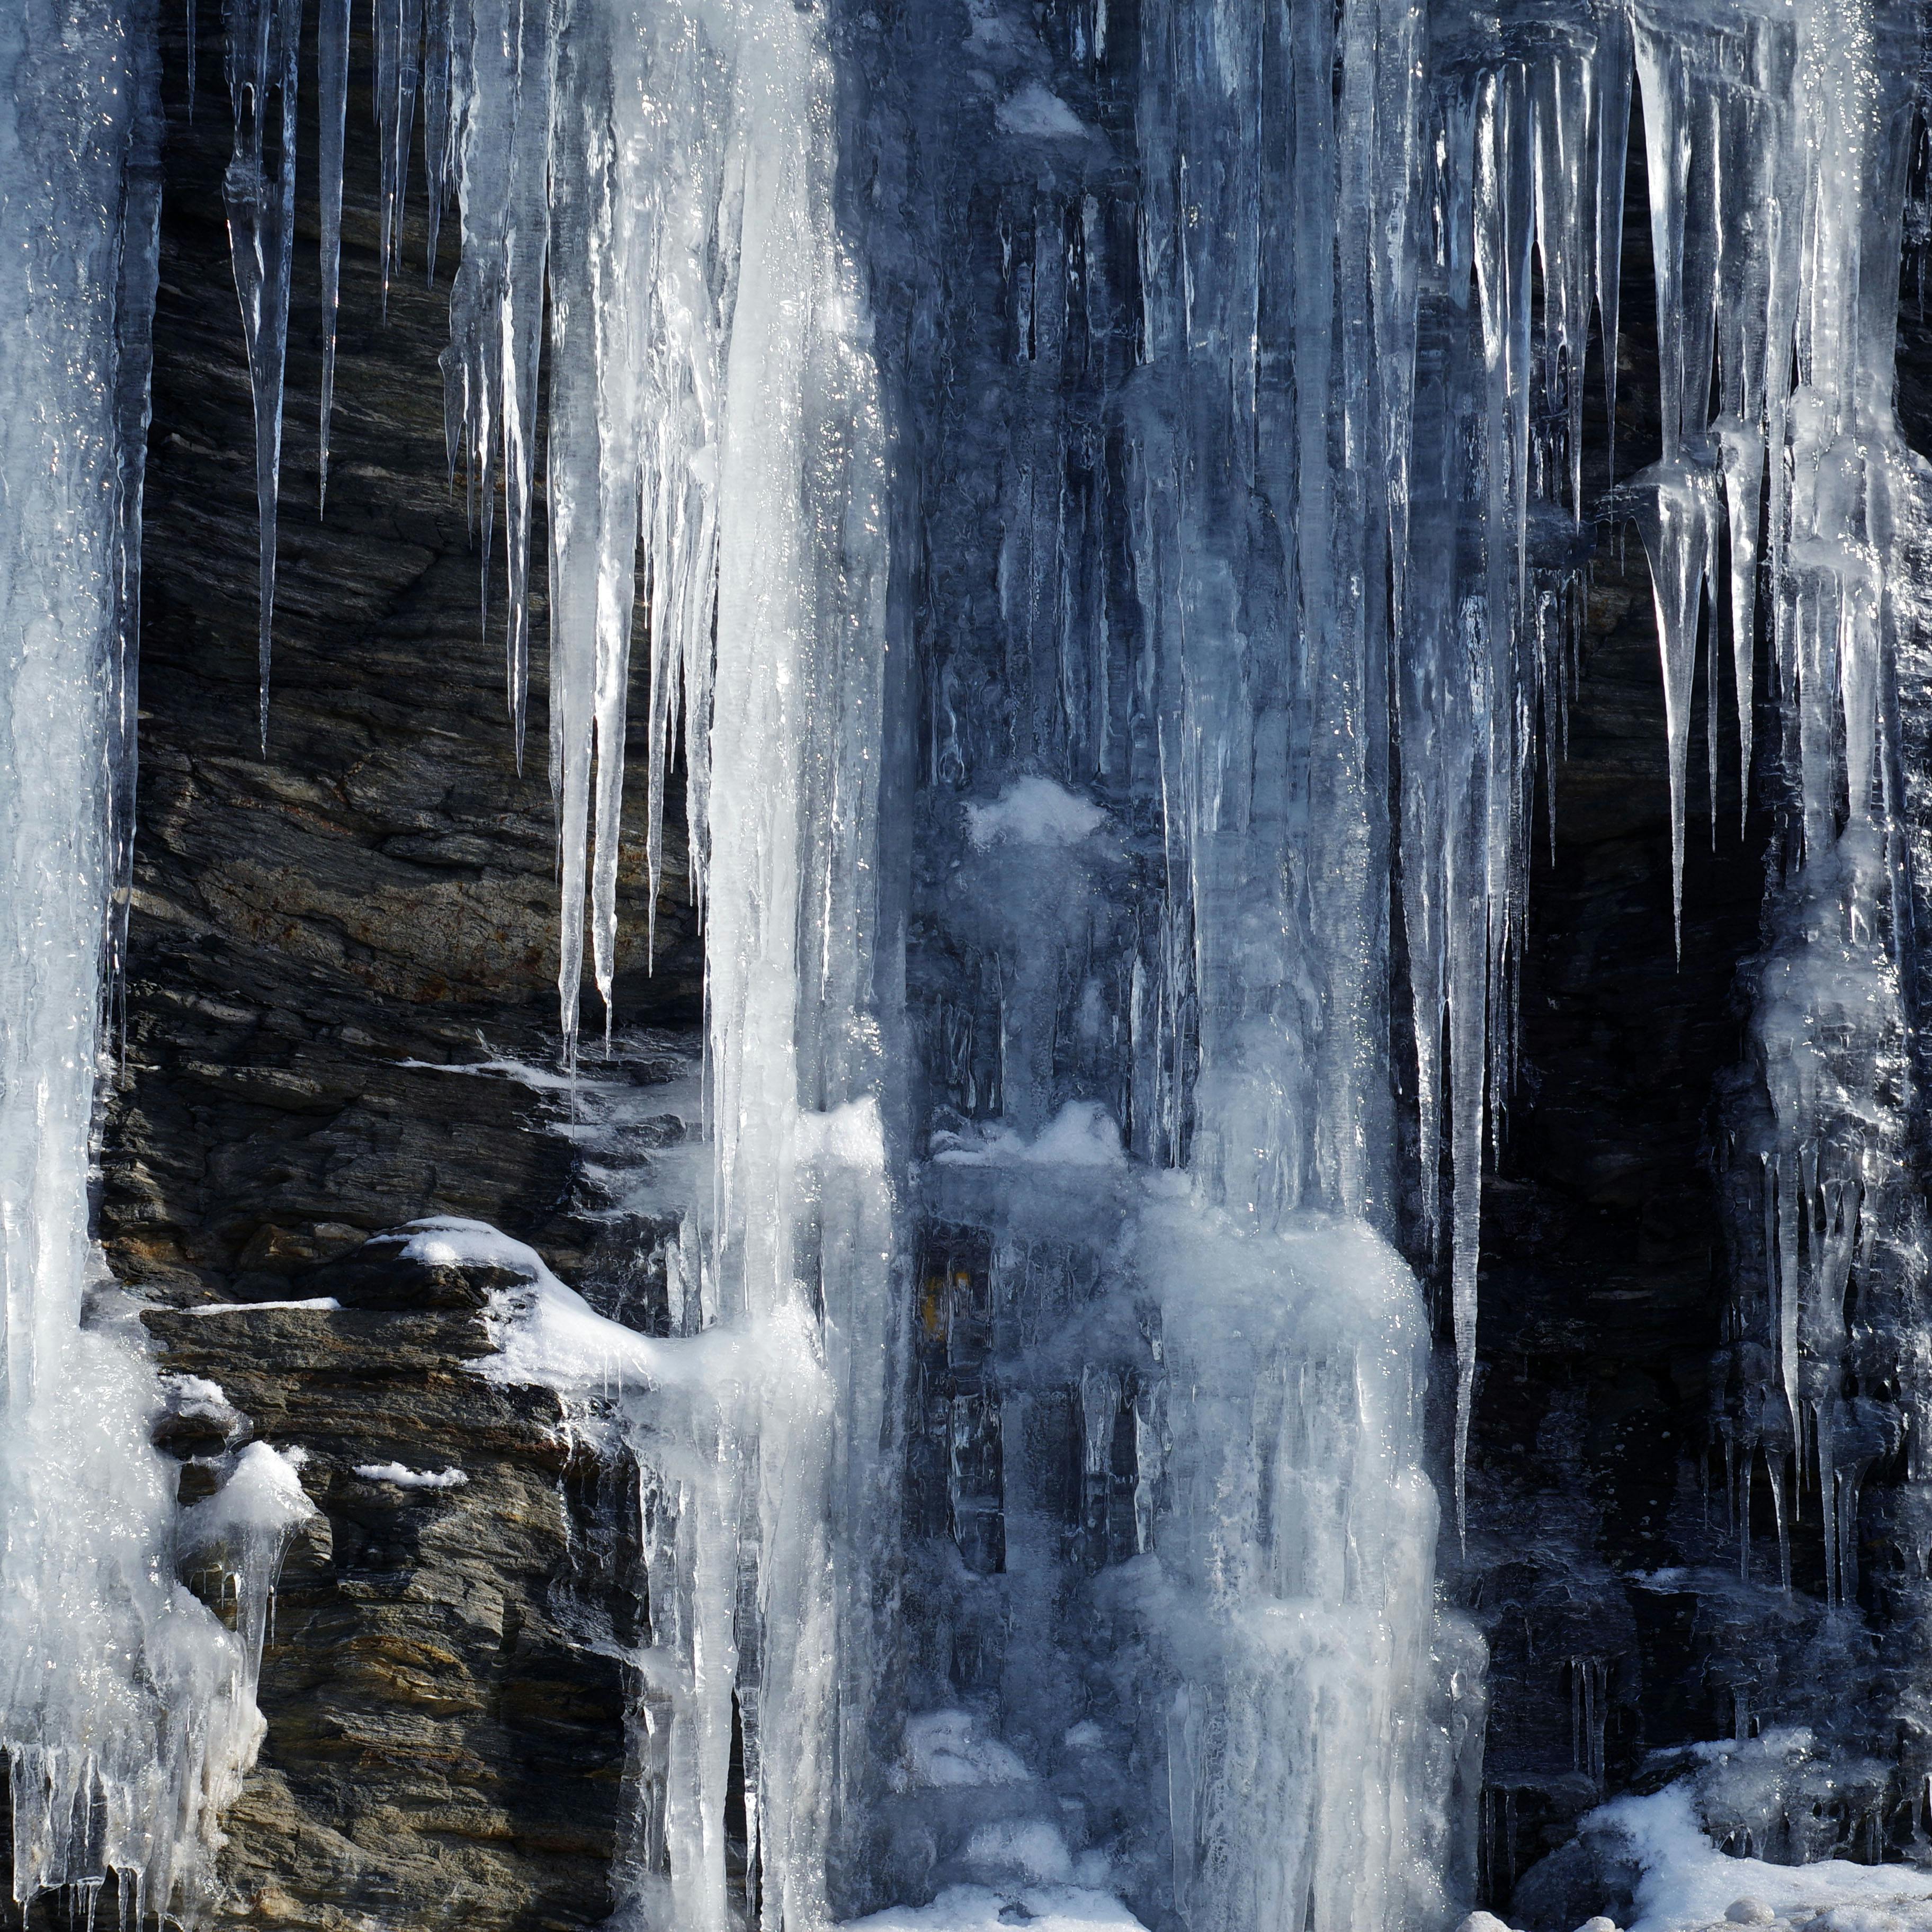 large icicles covering the face of a cliff